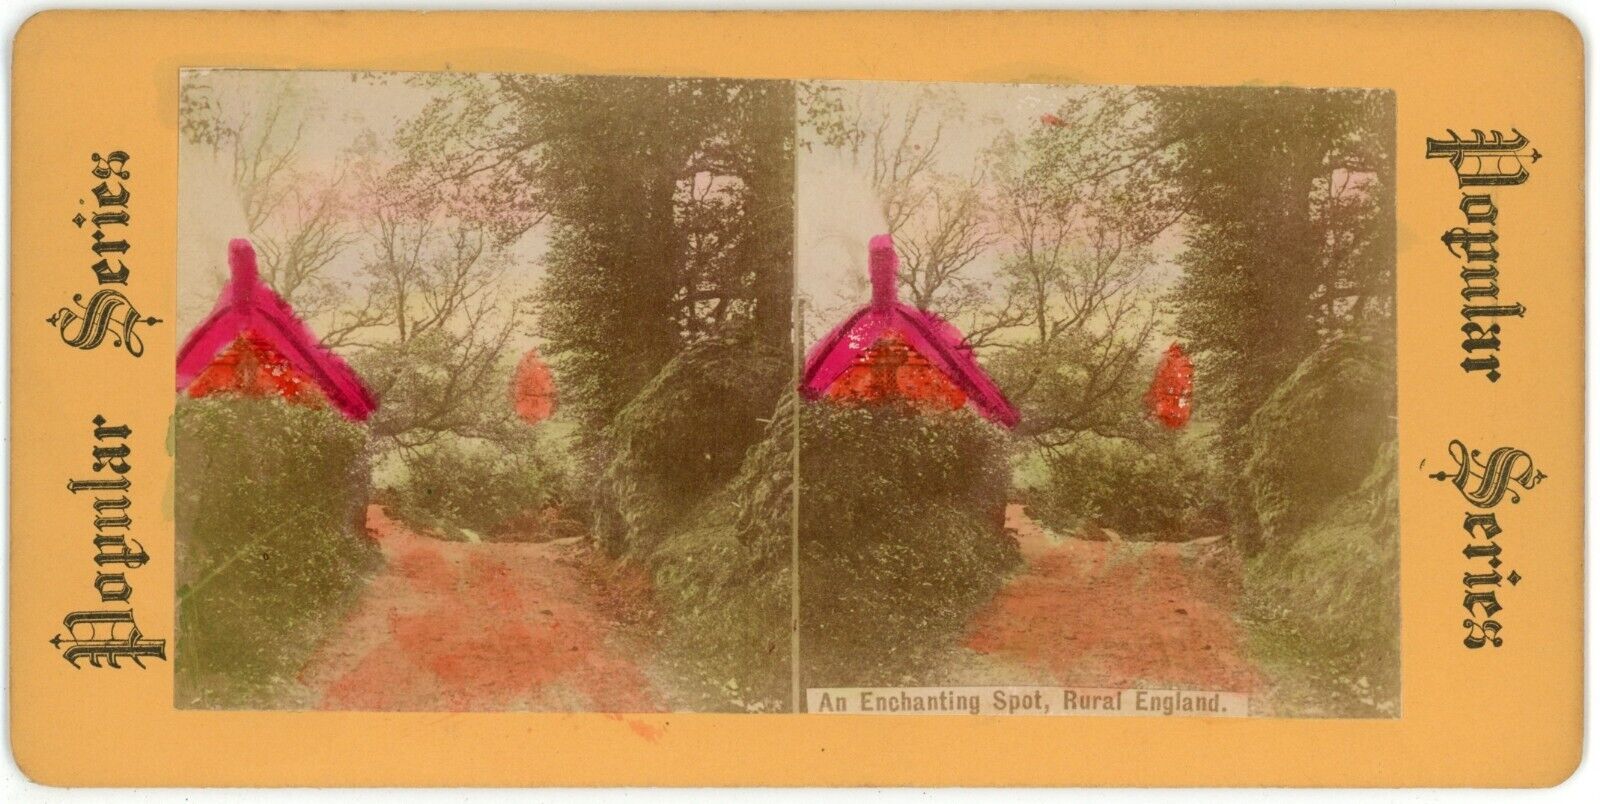 c1900's Colorized Real Photo Stereoview Card An Enchanting Spot, Rural England